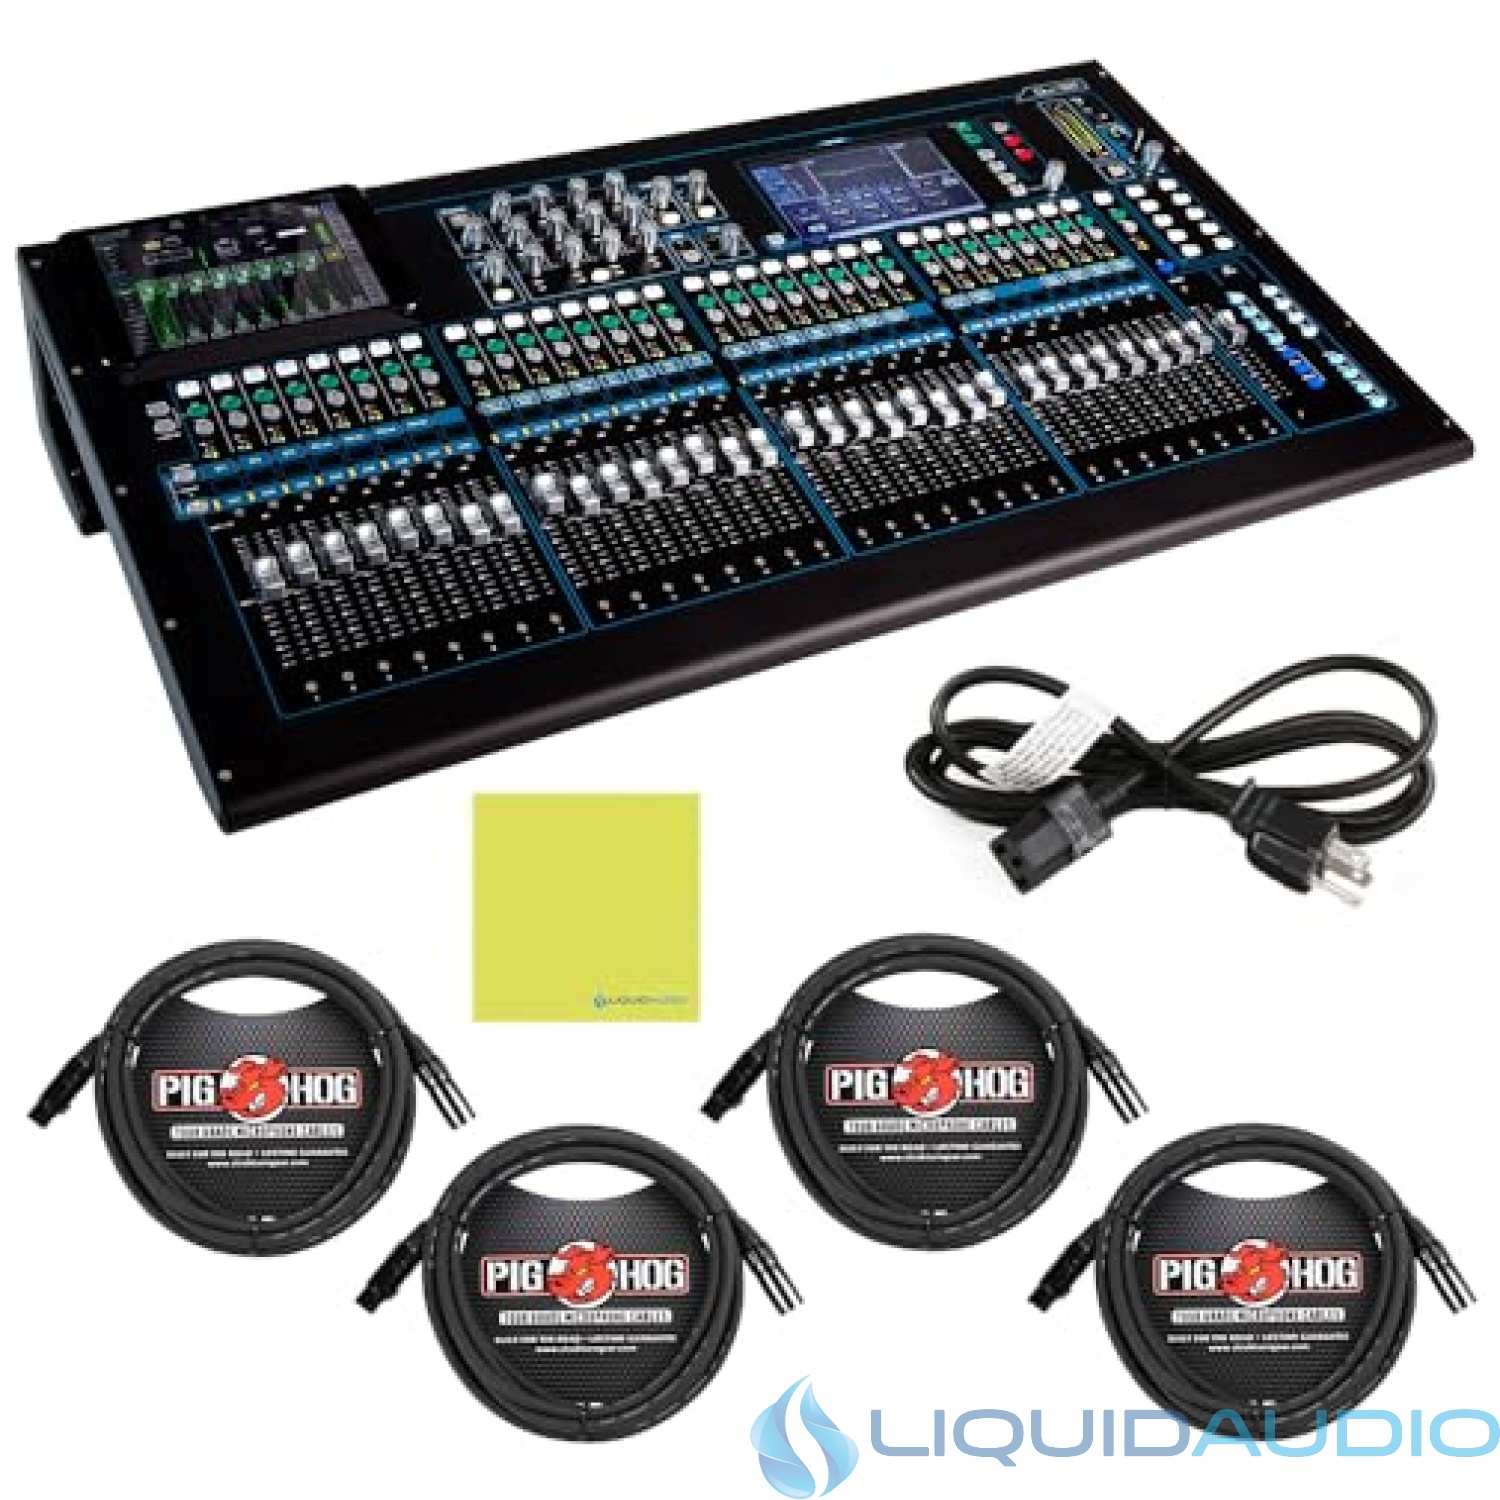 Allen & Heath AH-QU-32C 38 In/28 Out Compact Digital Mixer, Chrome Edition Bundle w/ 4-Pack Pig Hog PHM15 Pig Hog 8mm Mic Cable, Power Cable and Liquid Audio Polishing Cloth